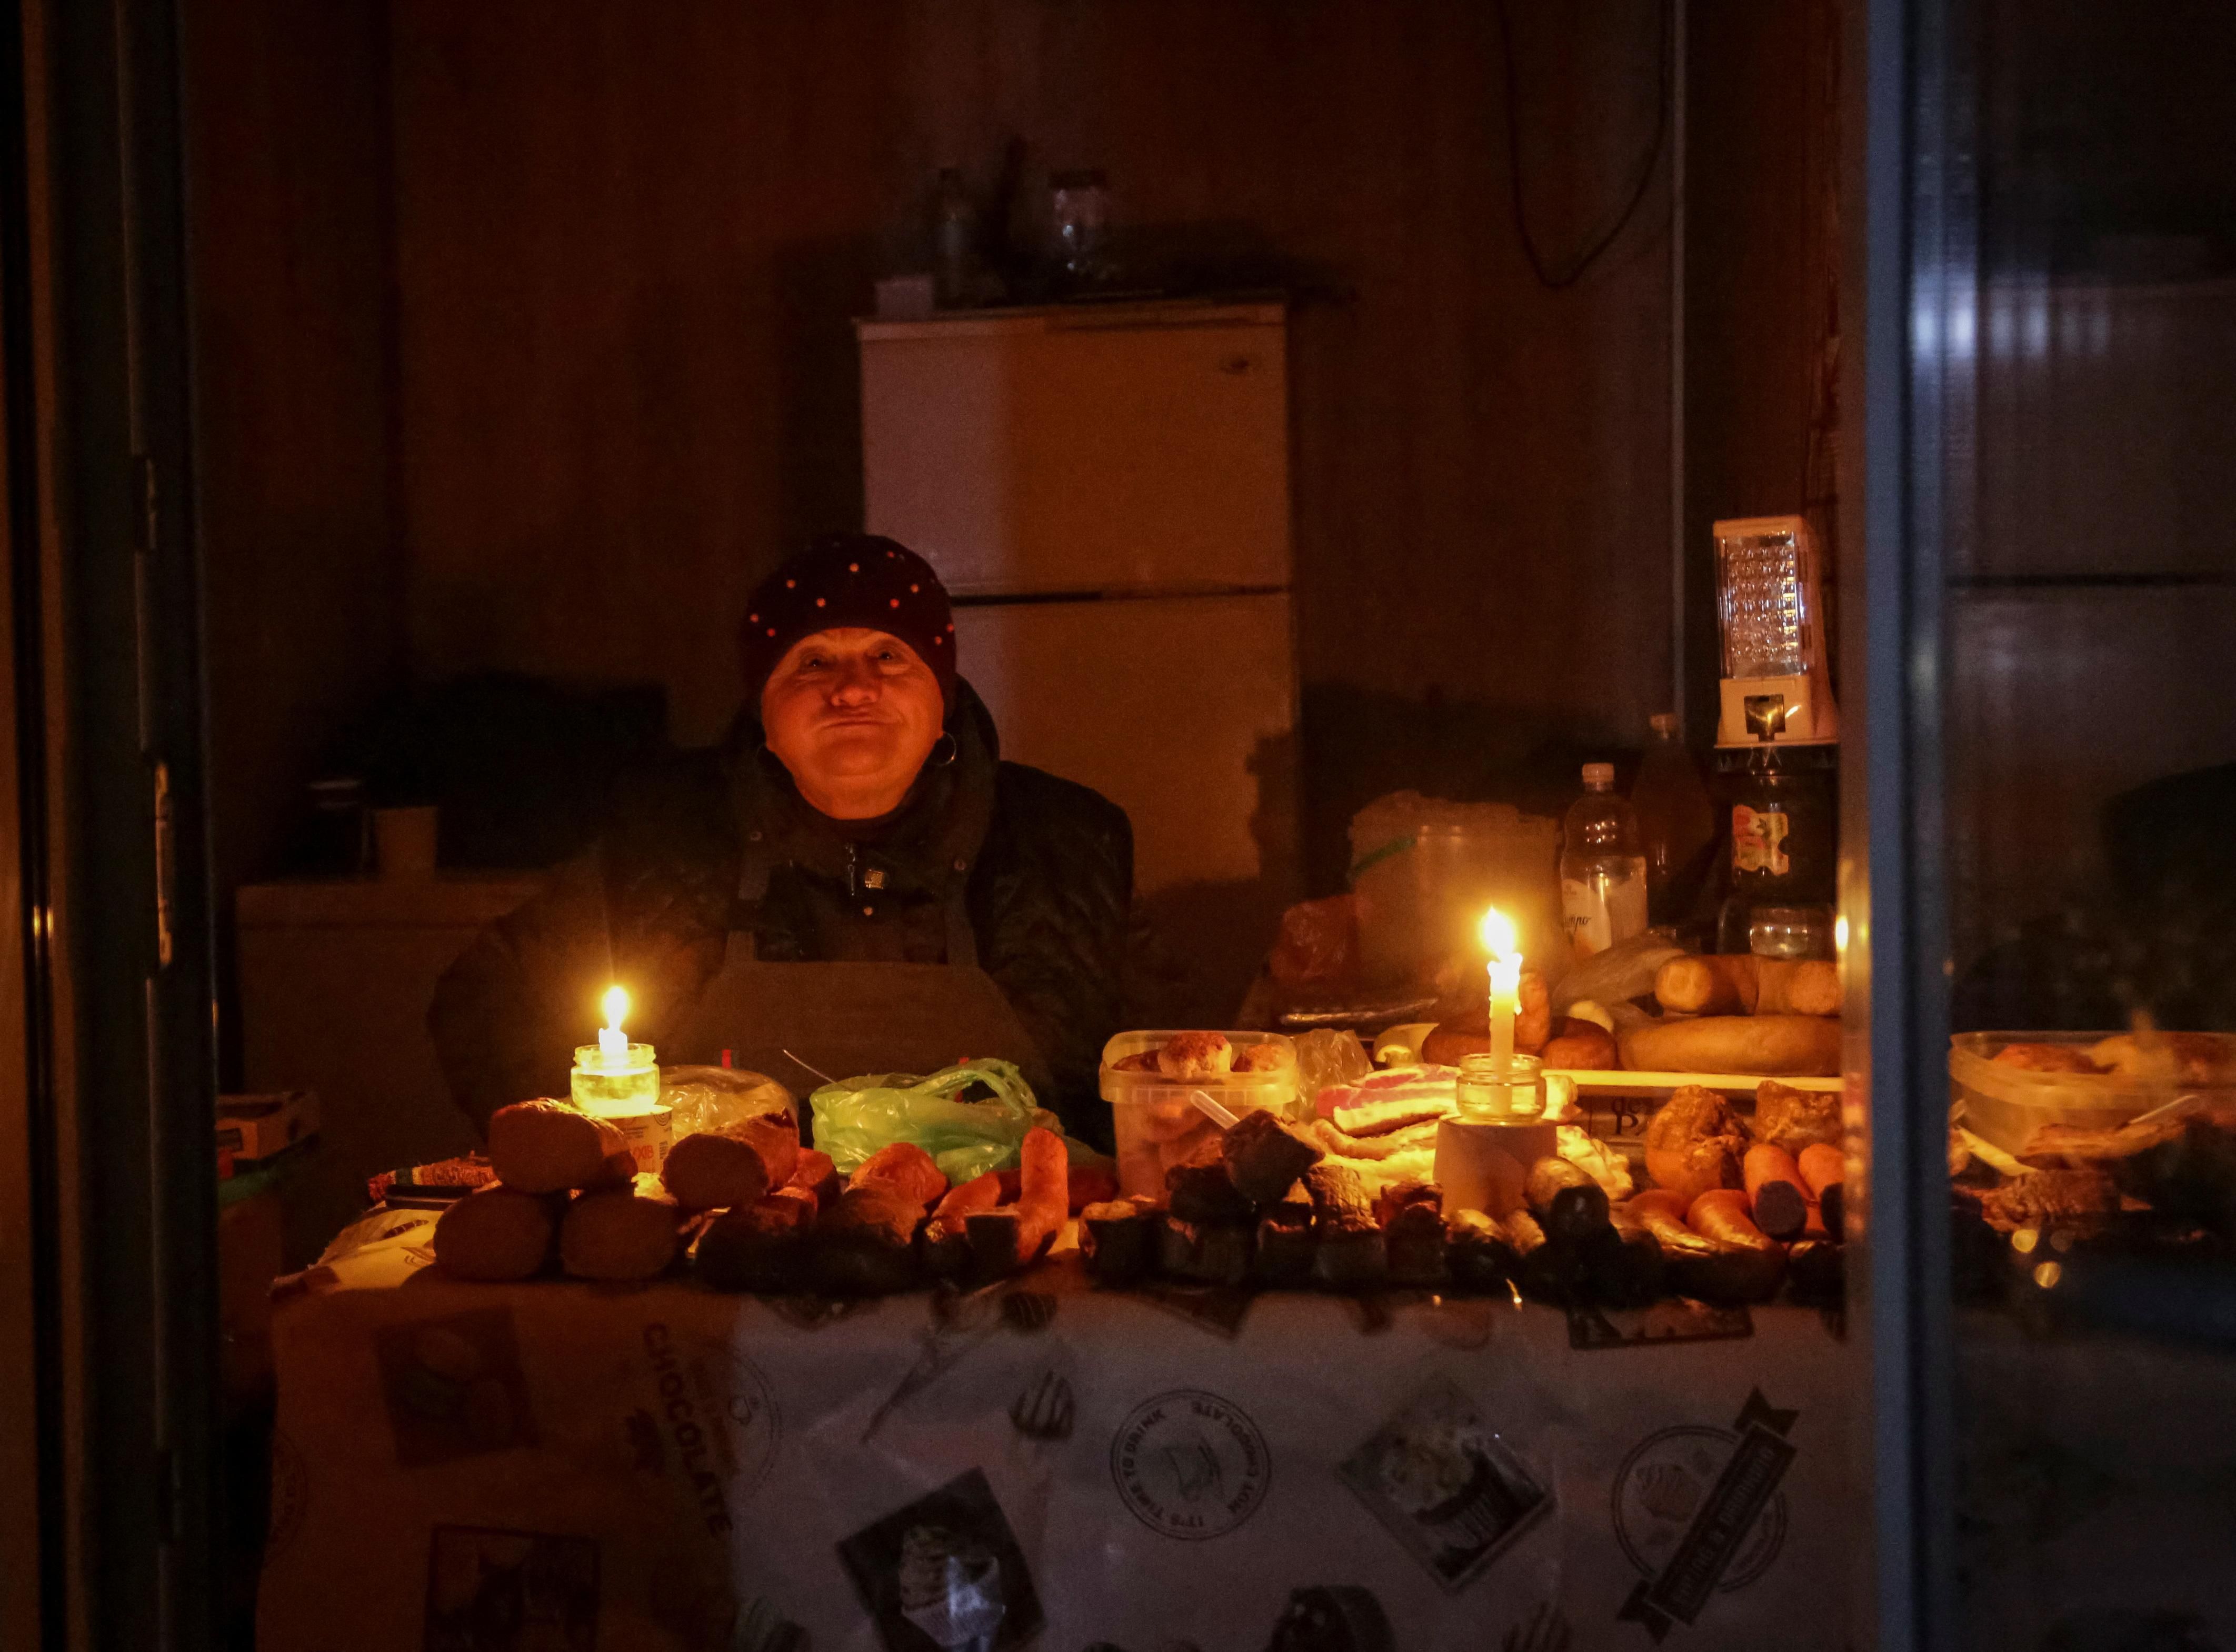 A vendor waits for customers in a small store that is lit with candles during a power outage in Odesa.